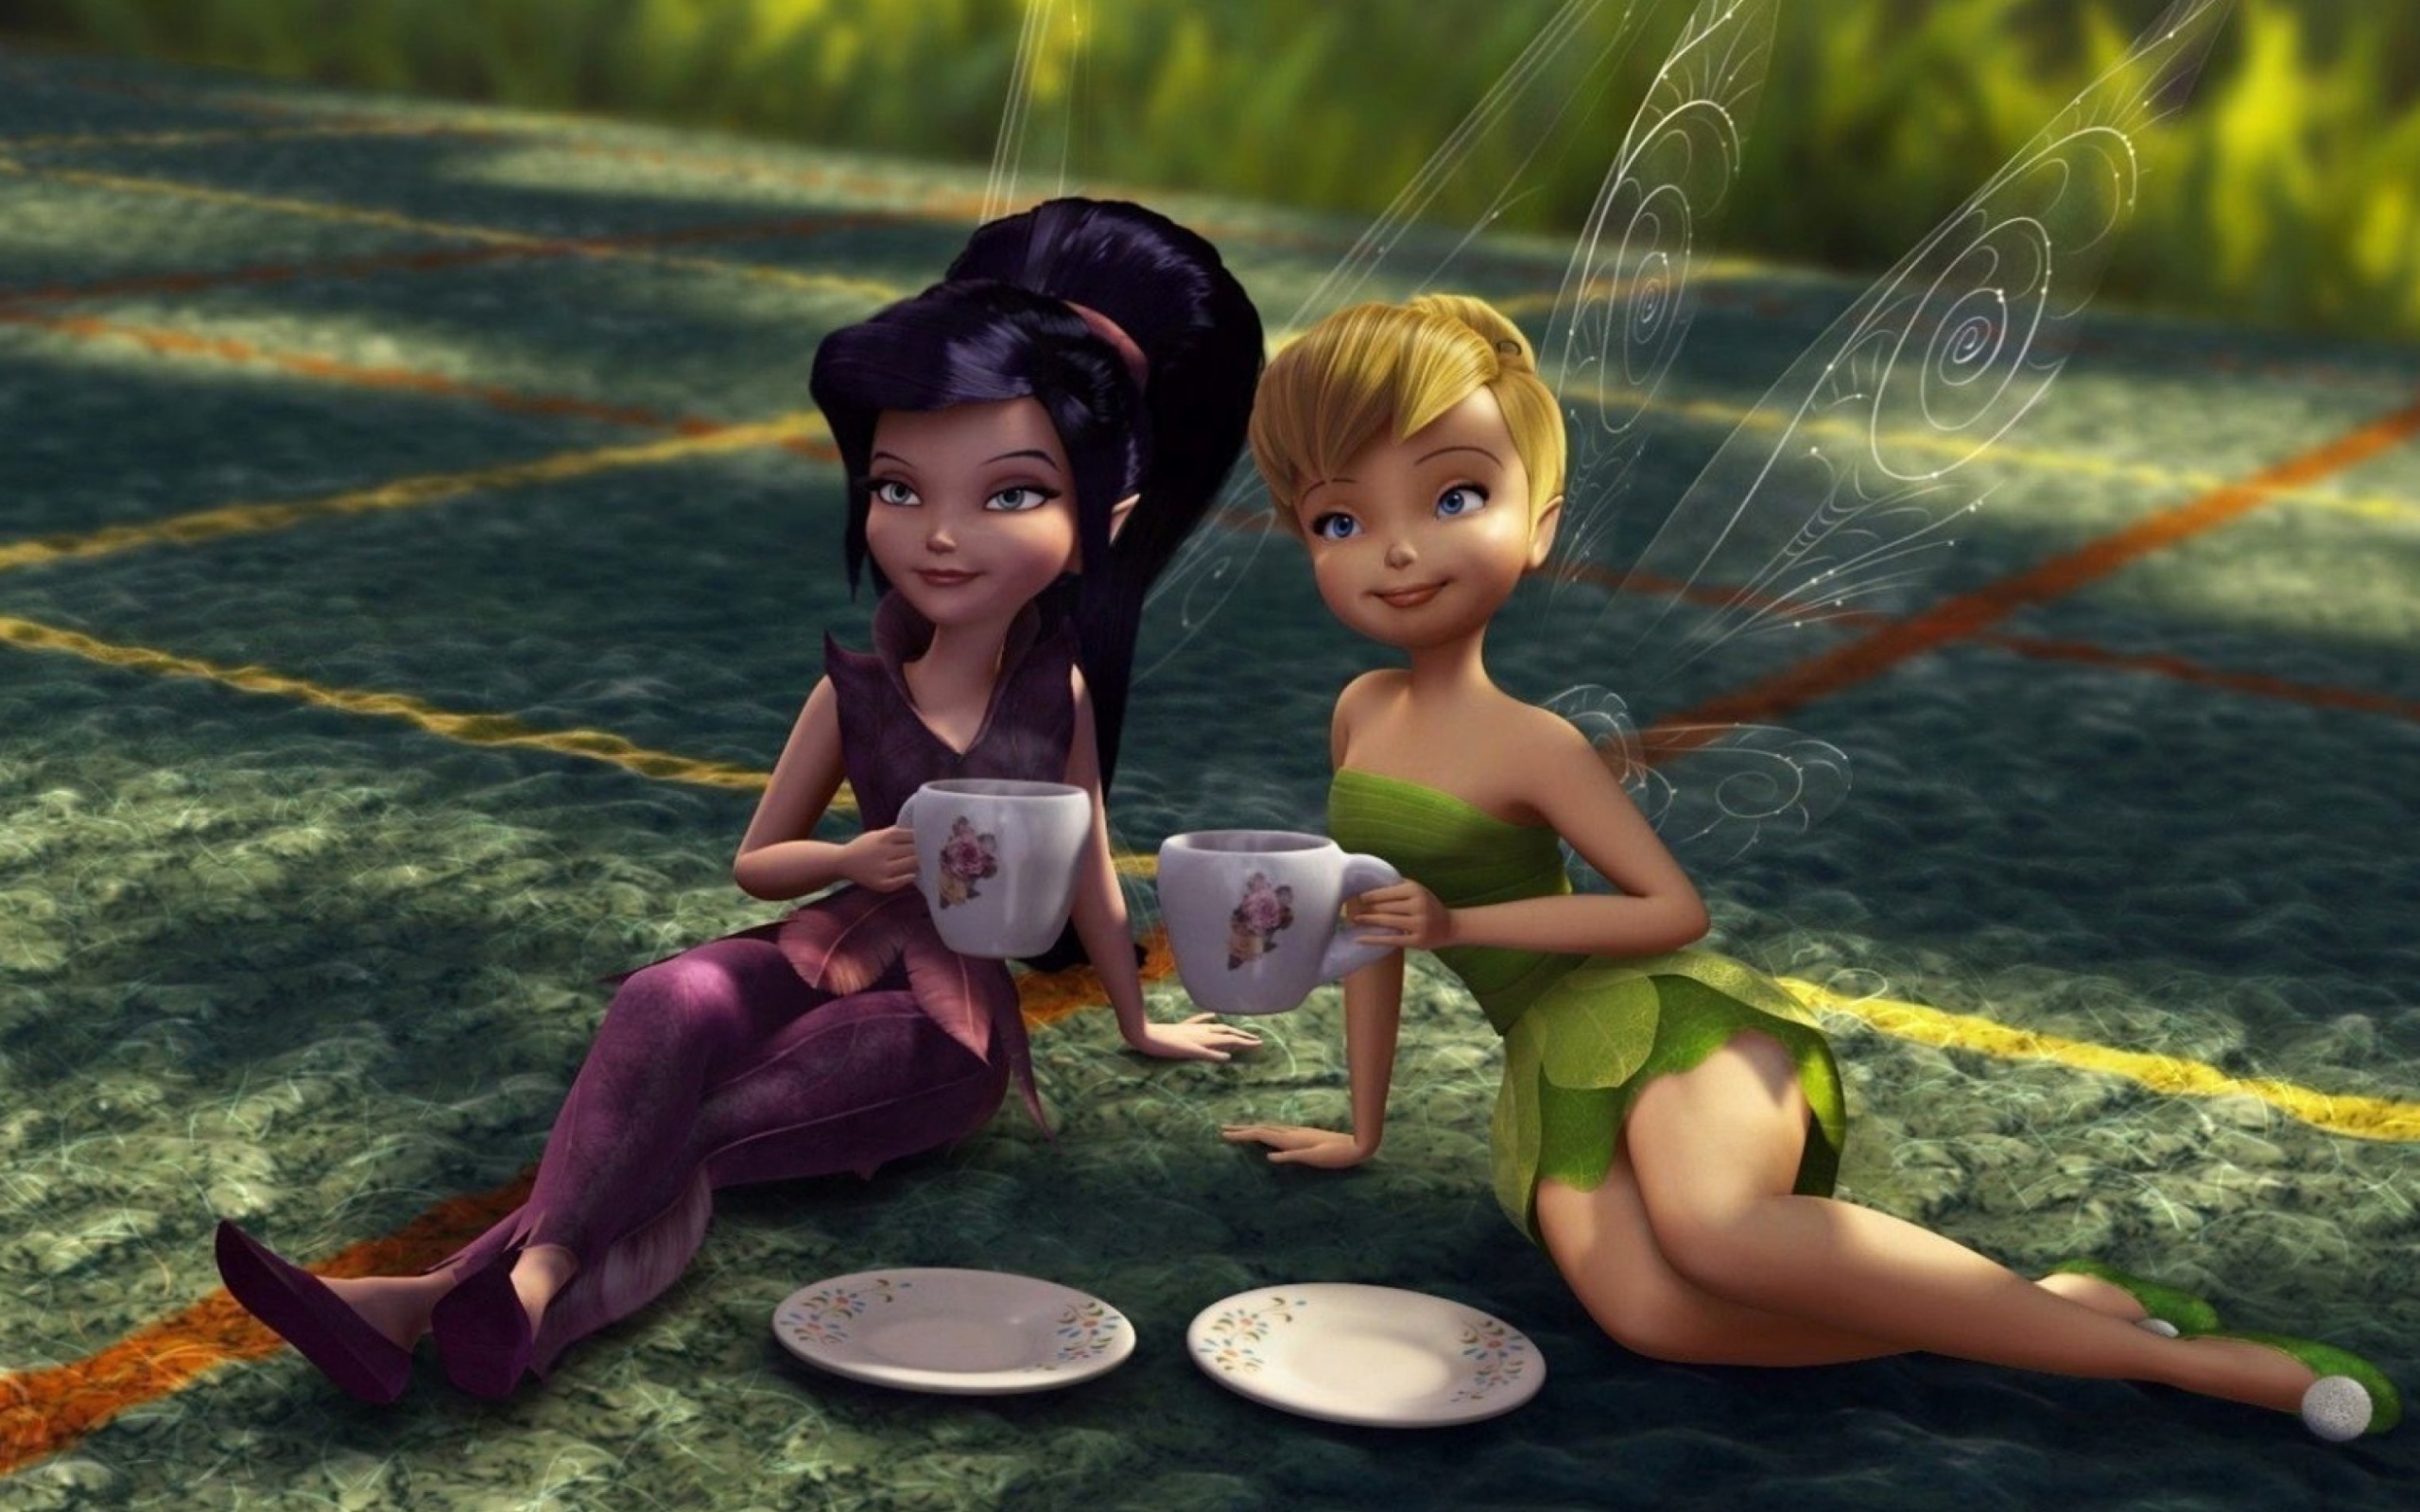 Fondo de pantalla Tinker Bell And The Great Fairy Rescue 2560x1600